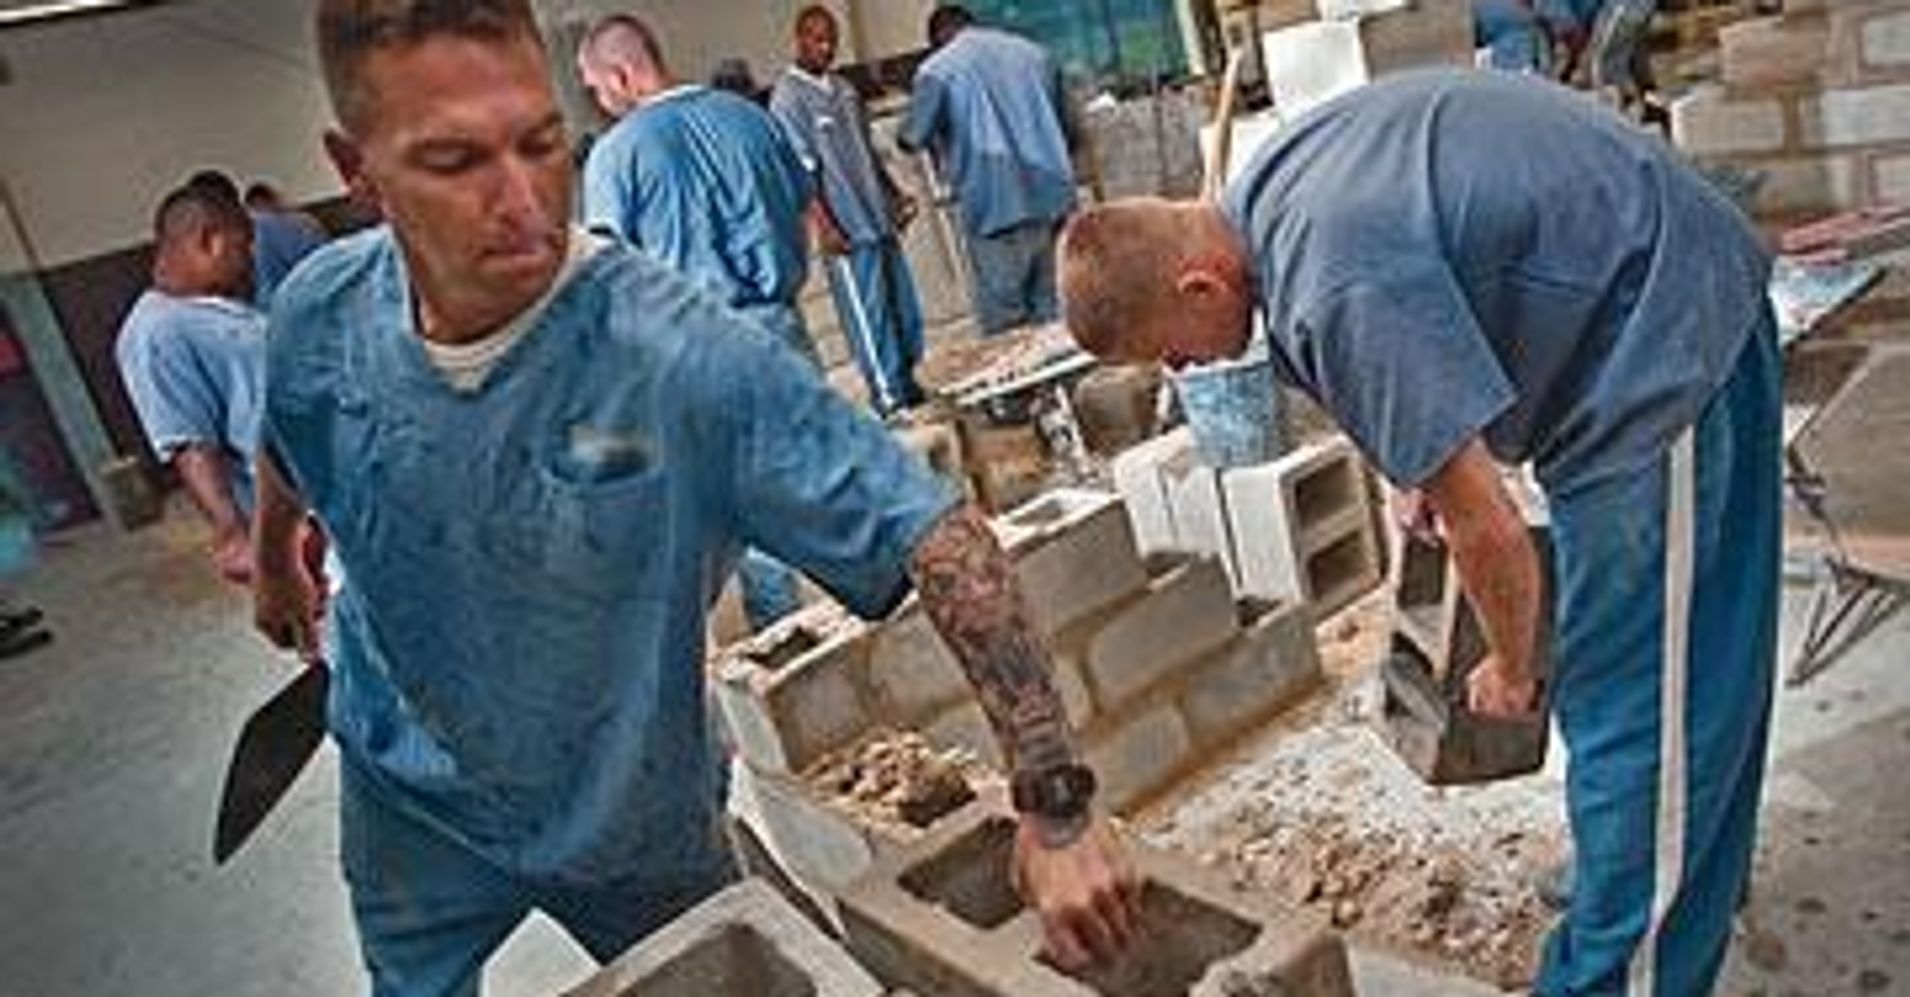 nearly-half-of-prisoners-lack-access-to-vocational-training-huffpost